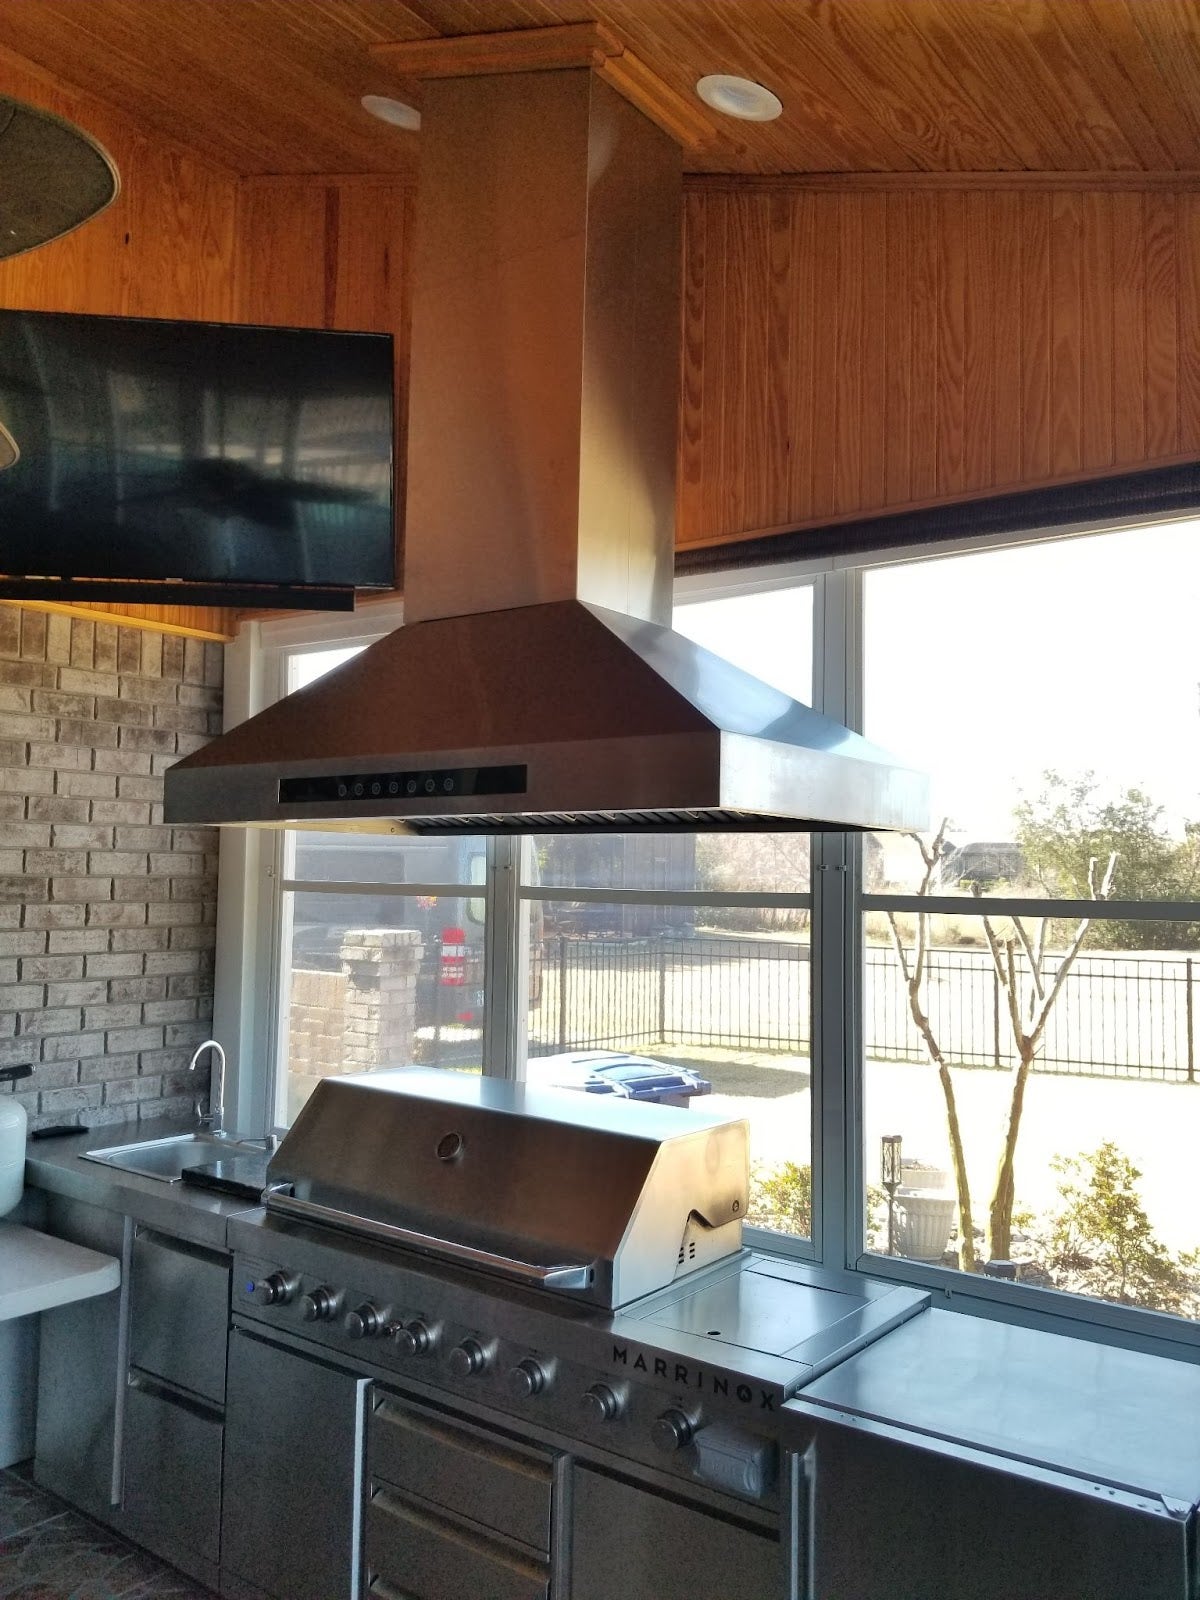 Inviting indoor patio grill area featuring a large stainless steel barbecue, extractor fan, and wooden interior details, with a view of the outdoors. - Proline Range Hoods - prolinerangehoods.com 